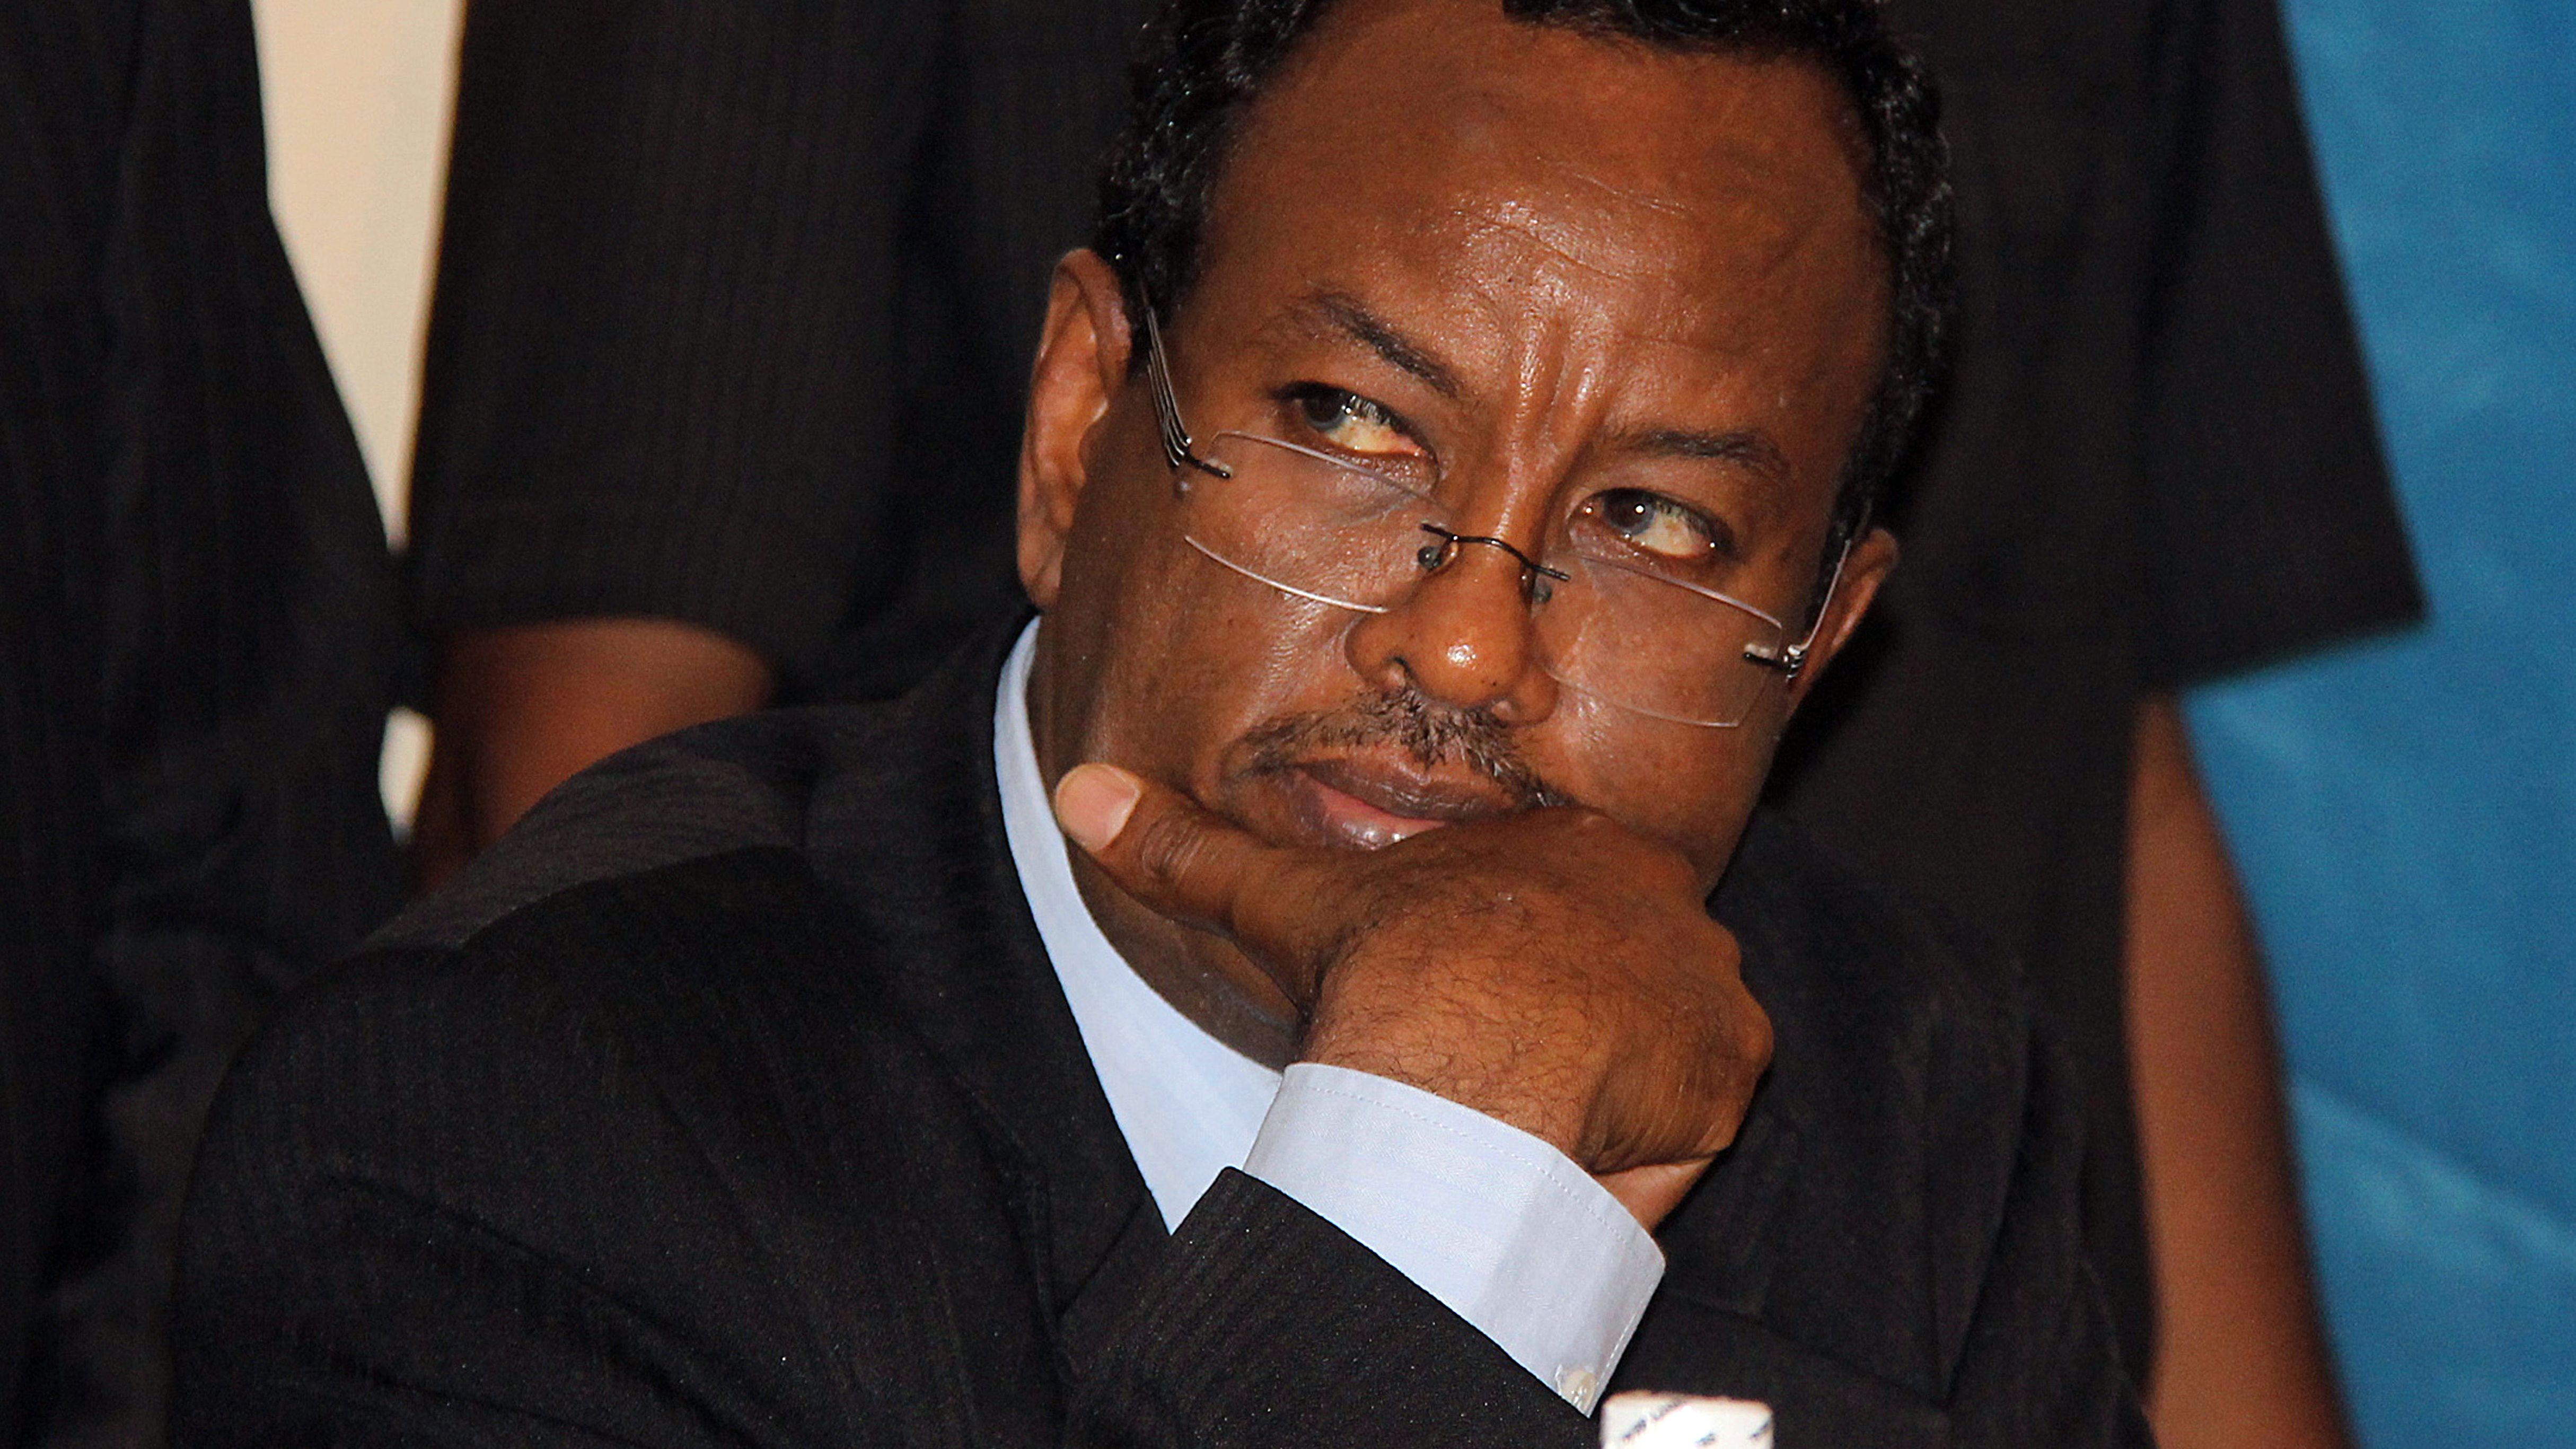 Somalia's newly appointed prime minister Abdi Farah Shirdon pictured on October 6, 2012.